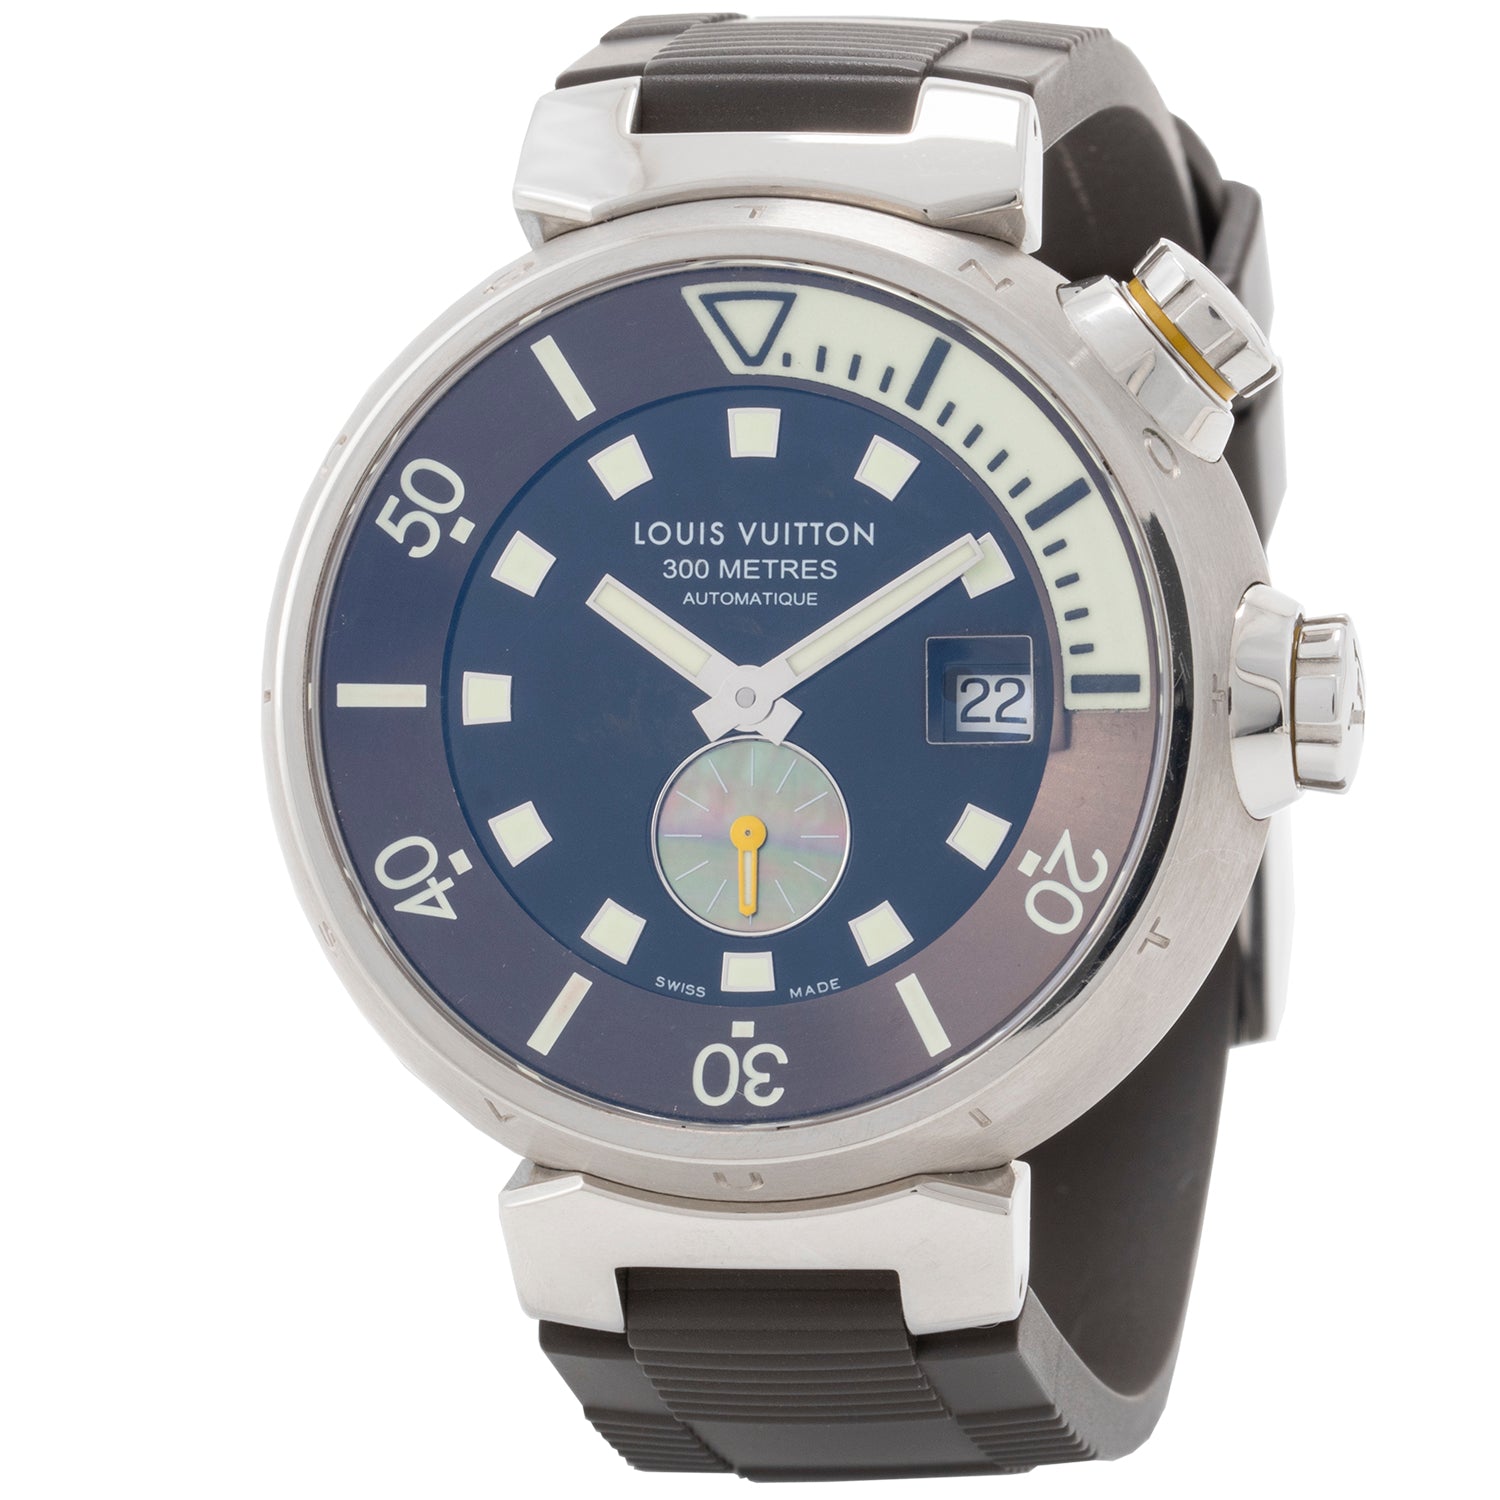 Tambour Louis Vuitton Rubber Strap - Traditional Watches R17339